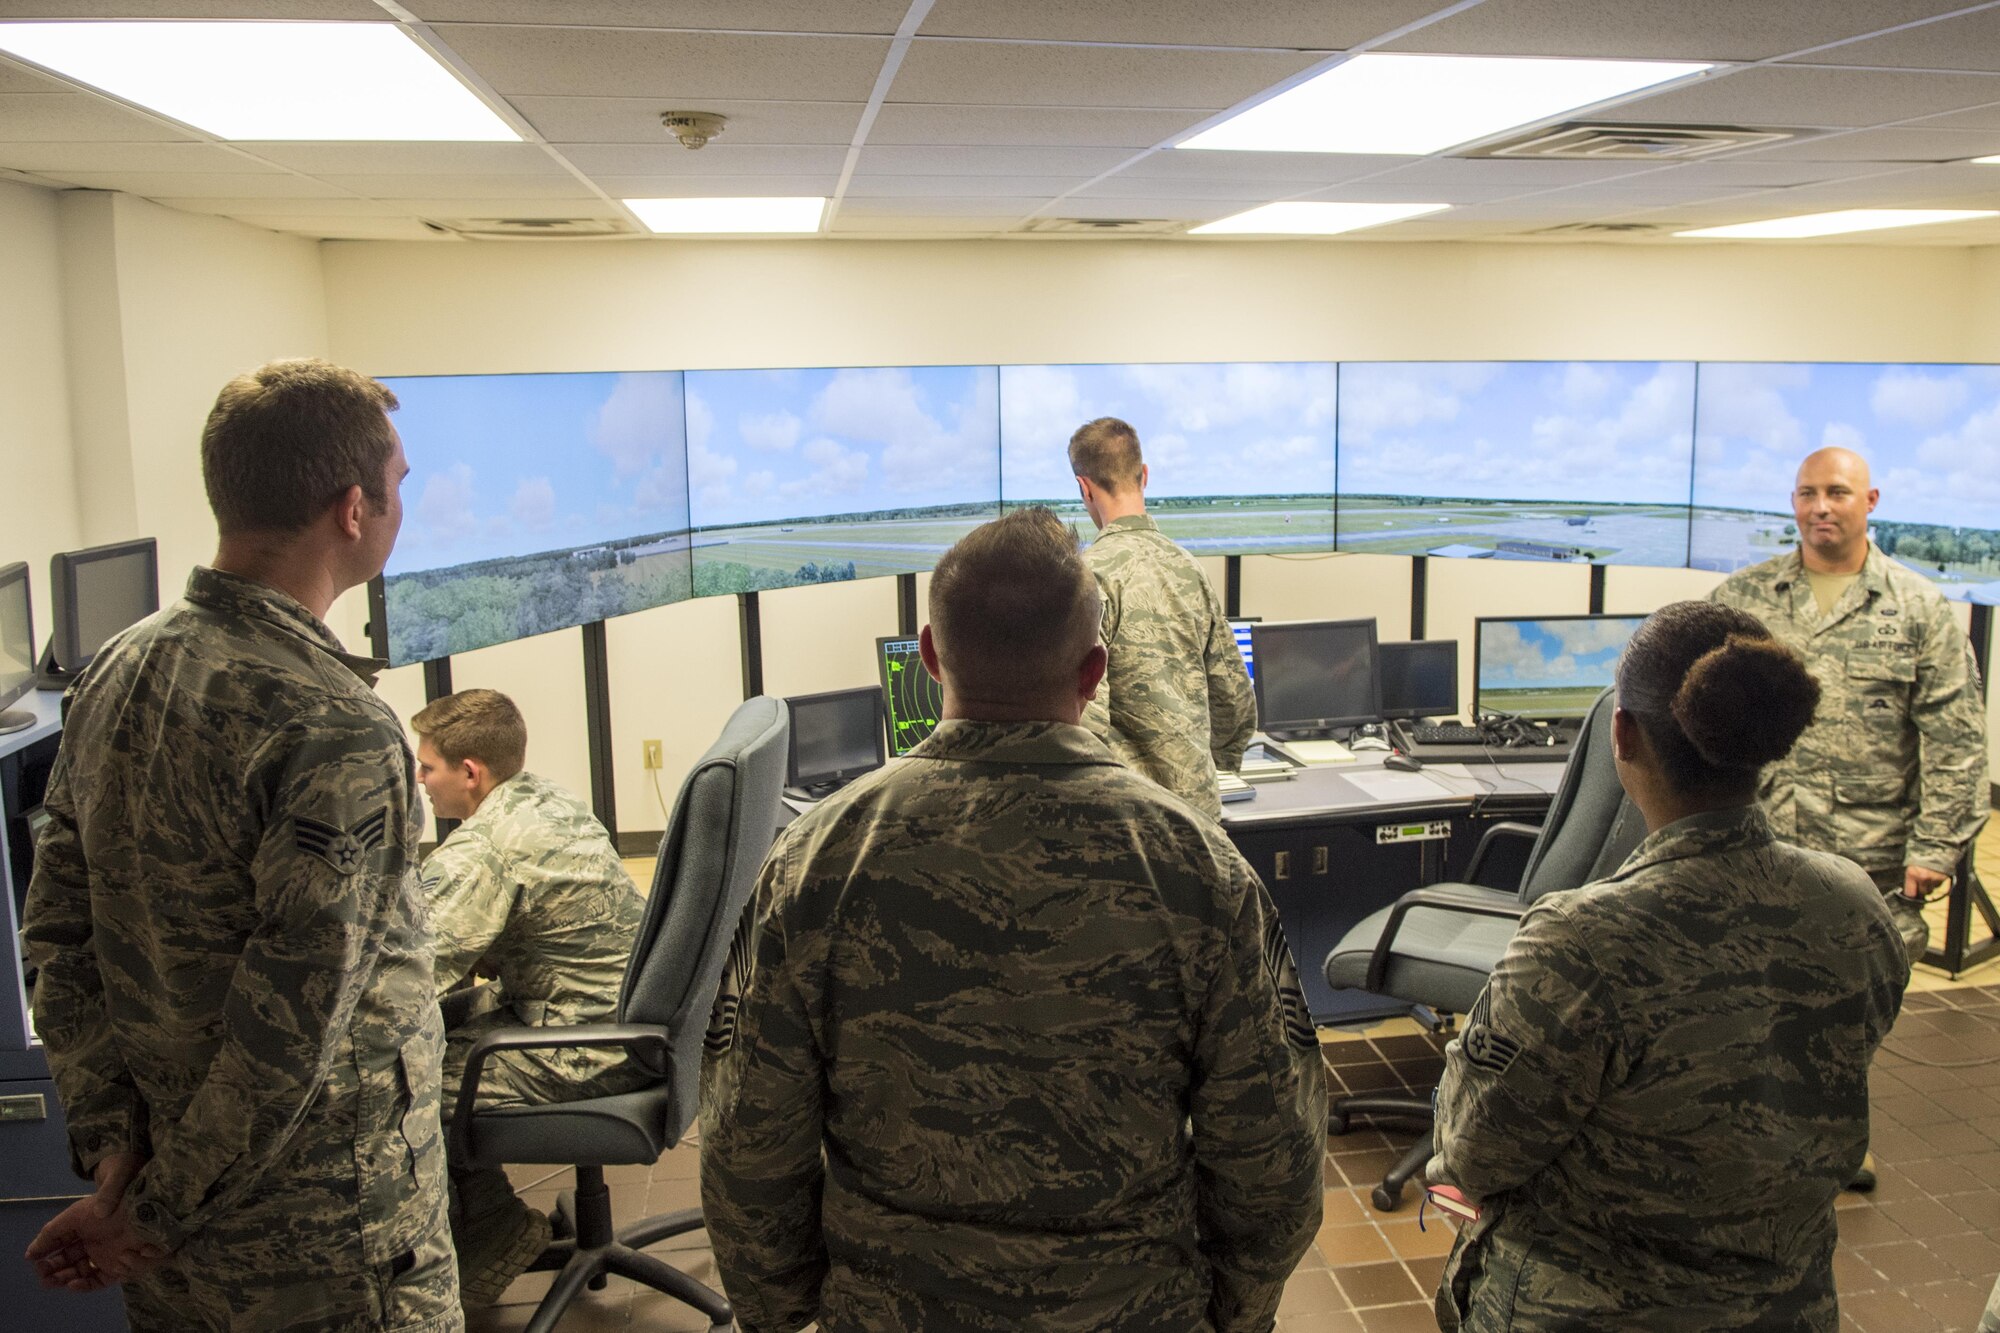 U.S. Air Force Chief Master Sgt. David Wade, center, 9th Air Force command chief, visits the air traffic control training simulator, Aug. 14, 2017, at Seymour Johnson Air Force Base, N.C. Airmen from the 4th Operational Support Squadron air traffic control use the simulator to continue training after technical school and maintain proficiency while supporting the Team Seymour mission in the air traffic control tower. (U.S. Air Force photo by Airman 1st Class Shawna L. Keyes)